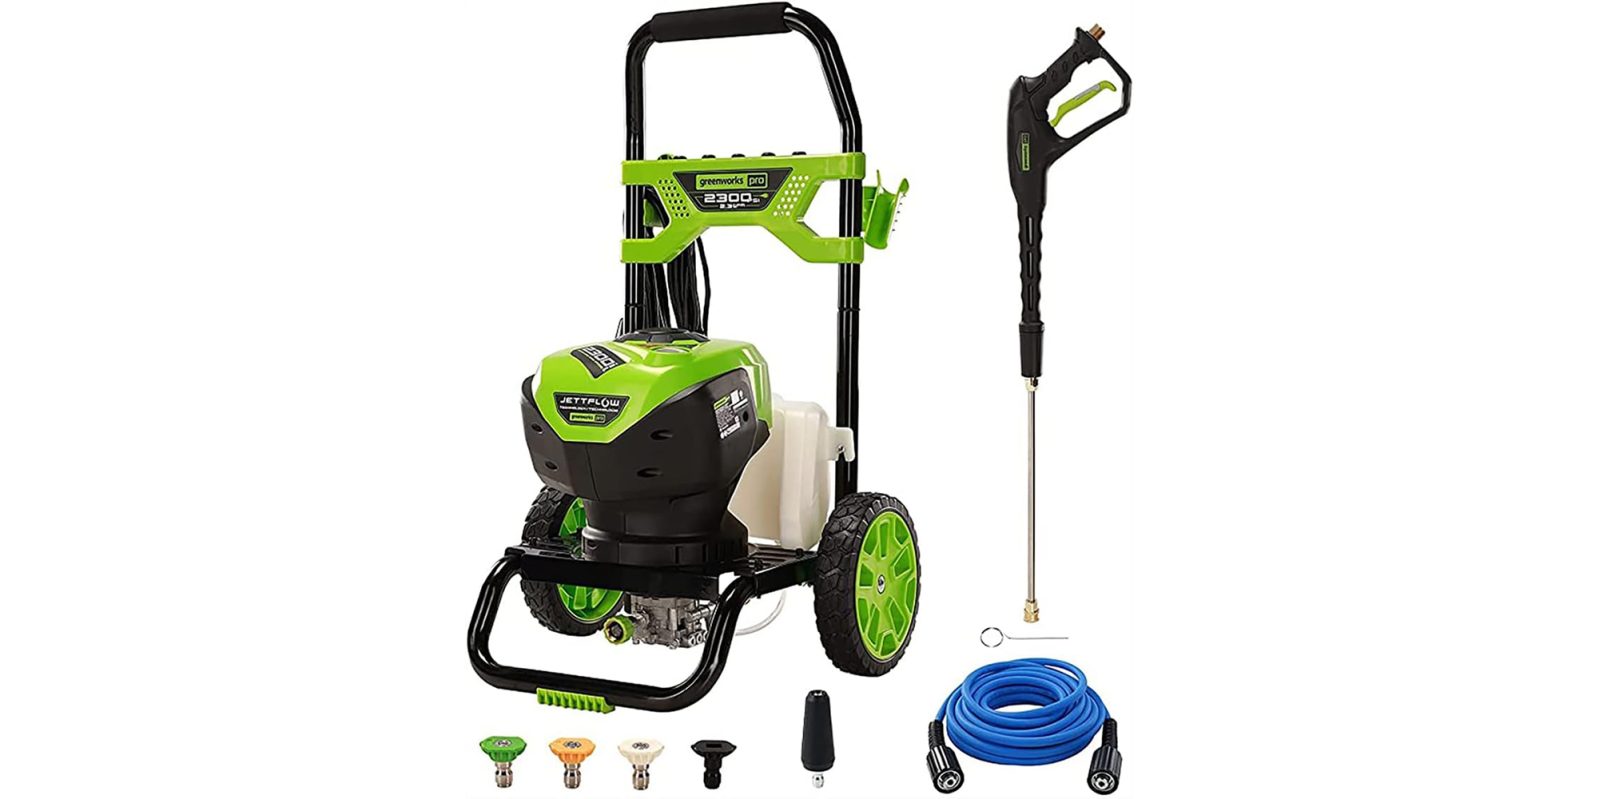 Save 30% on this Greenworks pressure washer (today only), more